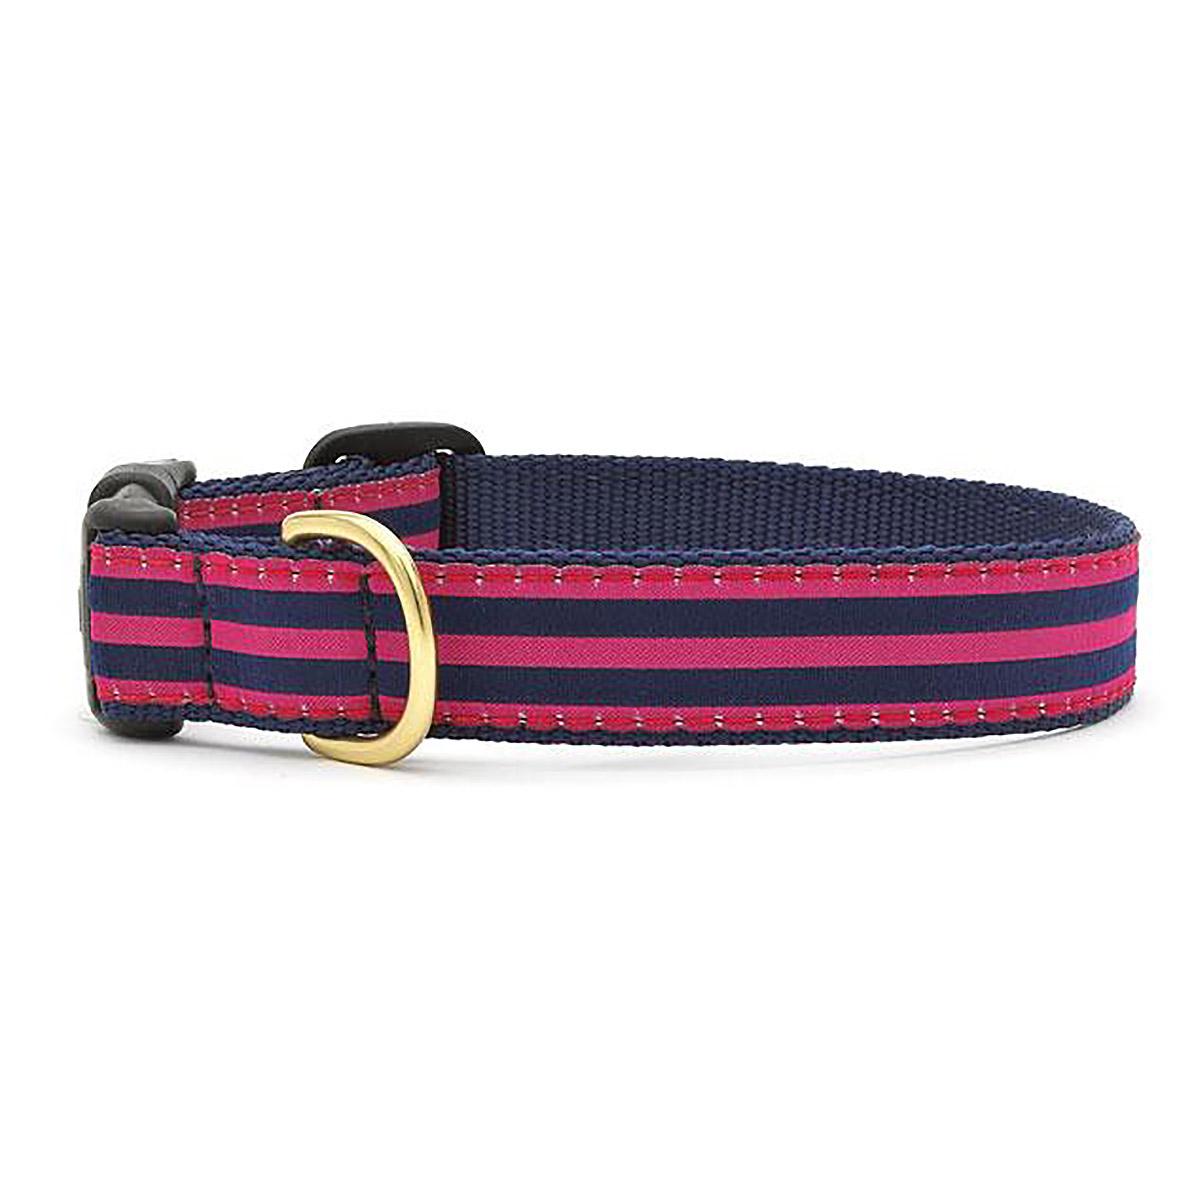 Barkberry Dog Collar by Up Country